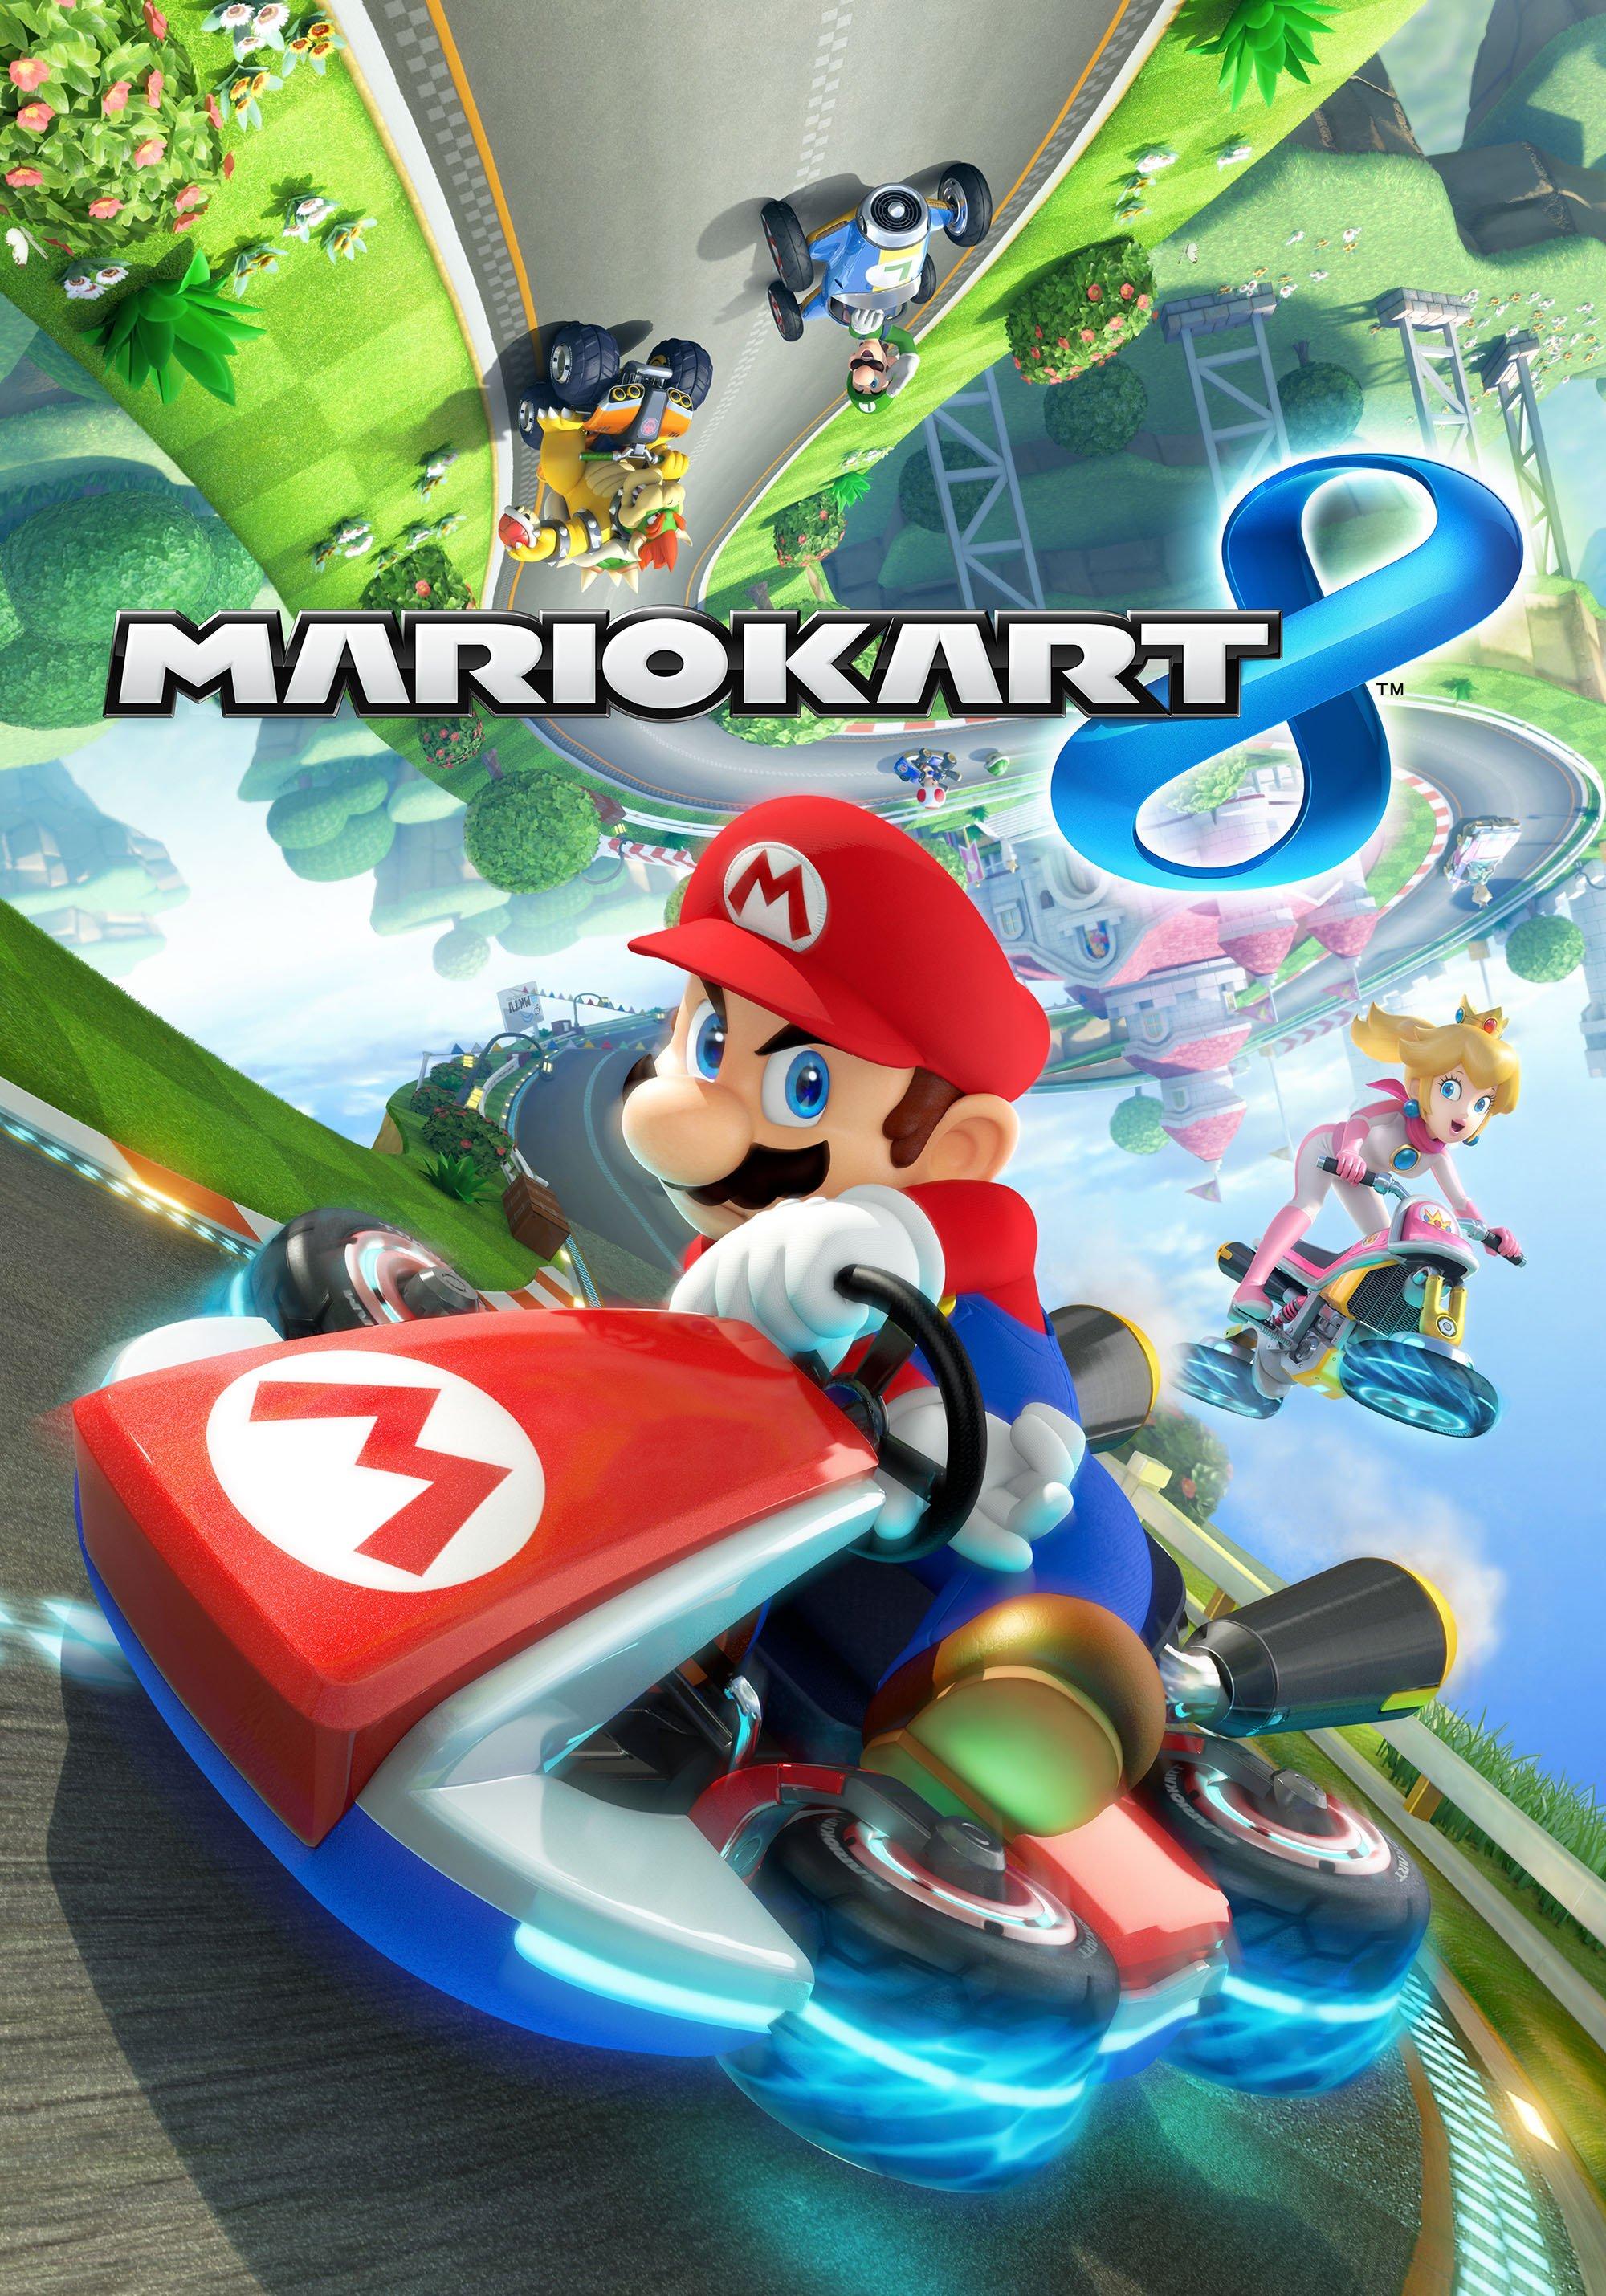 Mario Kart 8 - Deluxe - Nintendo Switch Download code shipping only